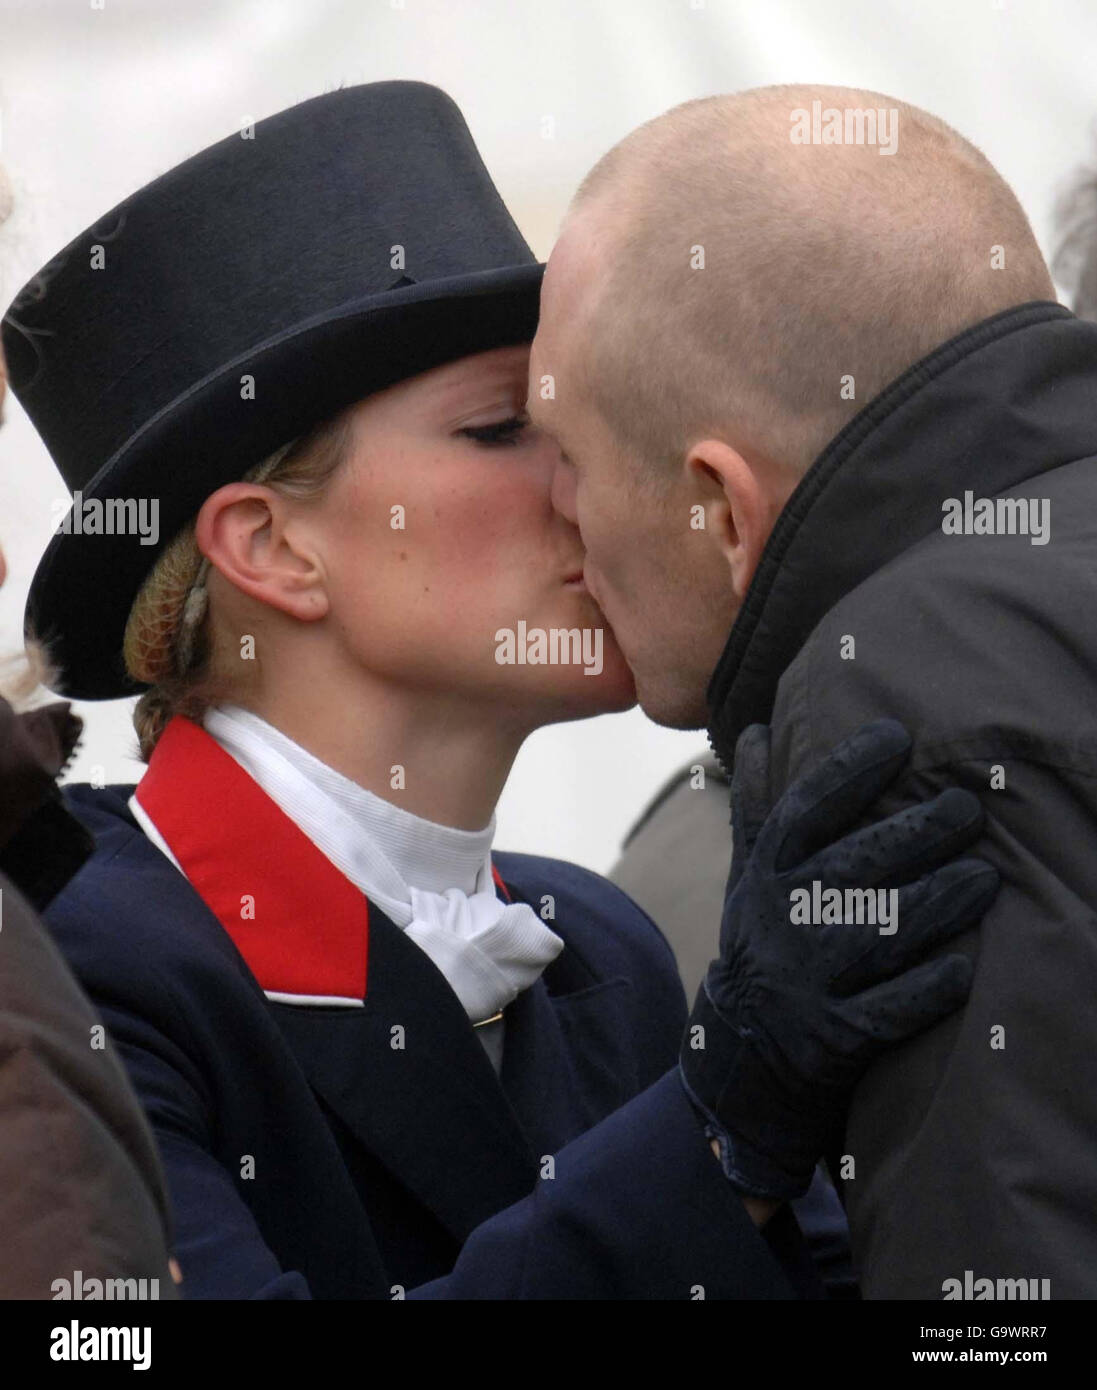 Zara Phillips and boyfriend Mike Tindall kiss after Zara had ridden in the  dressage on Toytown (aquiring 41.2 penalty points) at the Mitsubishi Motors  Badminton Horse Trials Stock Photo - Alamy